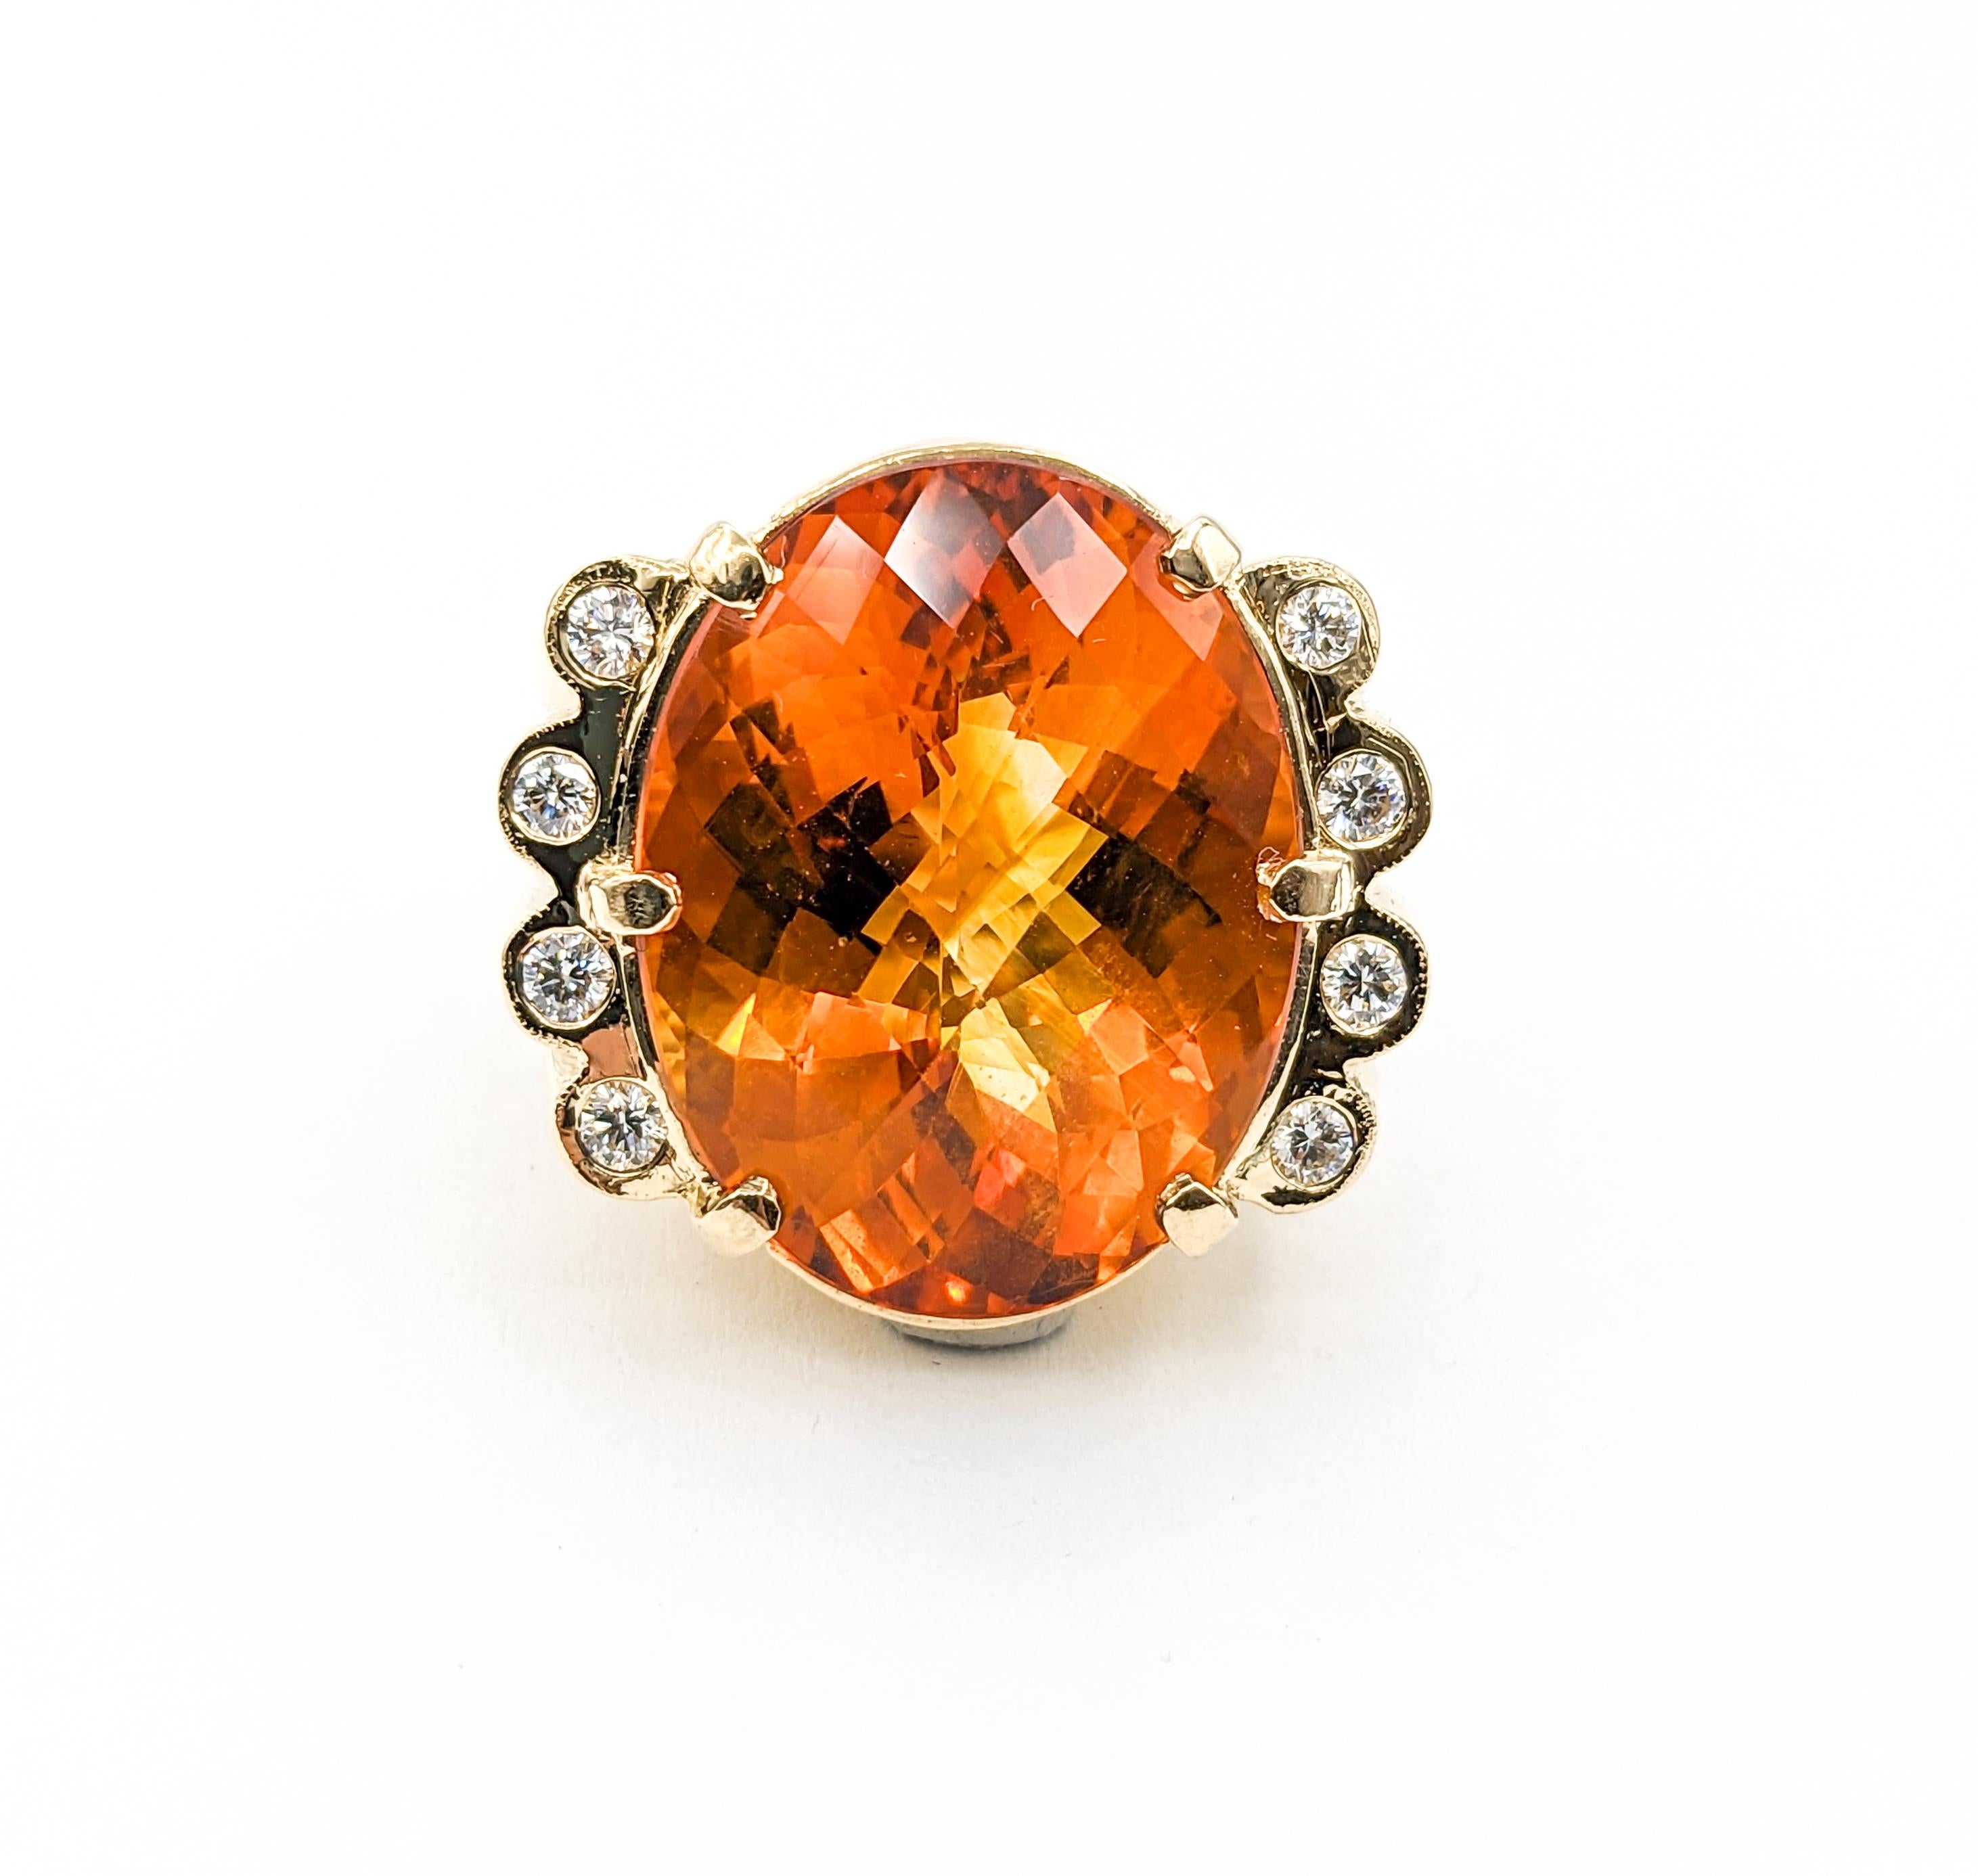 30ct Citrine & Diamond Ring In Yellow Gold

Introducing this substantial natural Citrine ring, beautifully crafted in 14k yellow gold. This ring features a center piece of 22x17.5mm (30ct) Citrine, glowing with a golden amber hue, adds a touch of